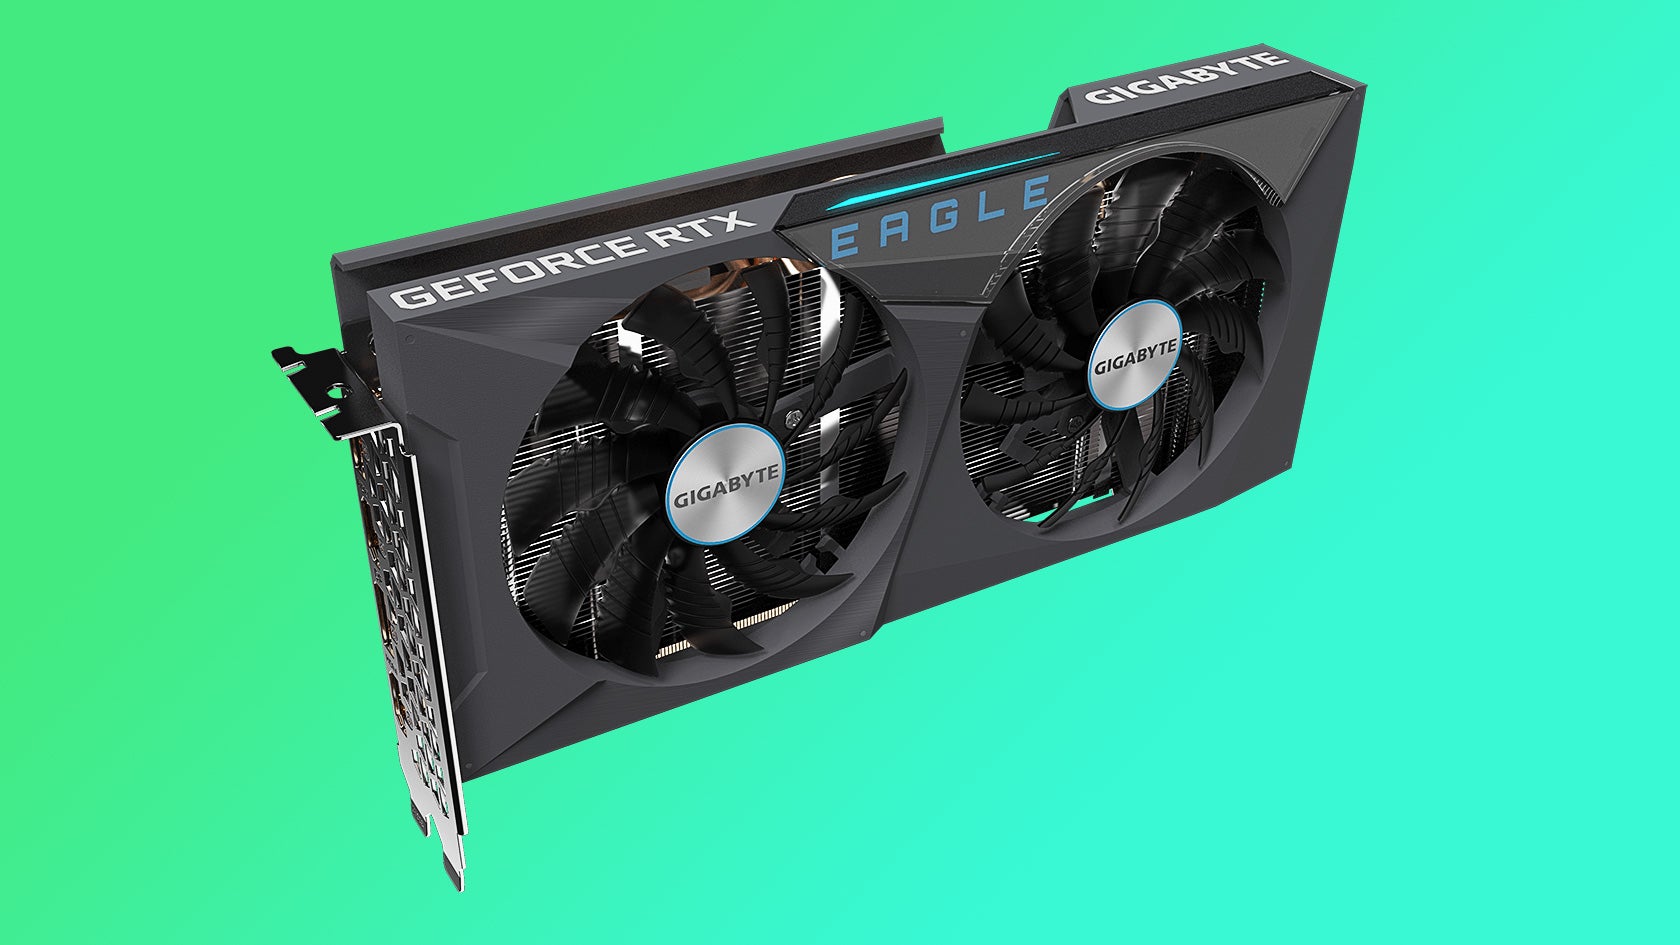 Get an RTX 3060 GPU for £279 thanks to this Ebay code